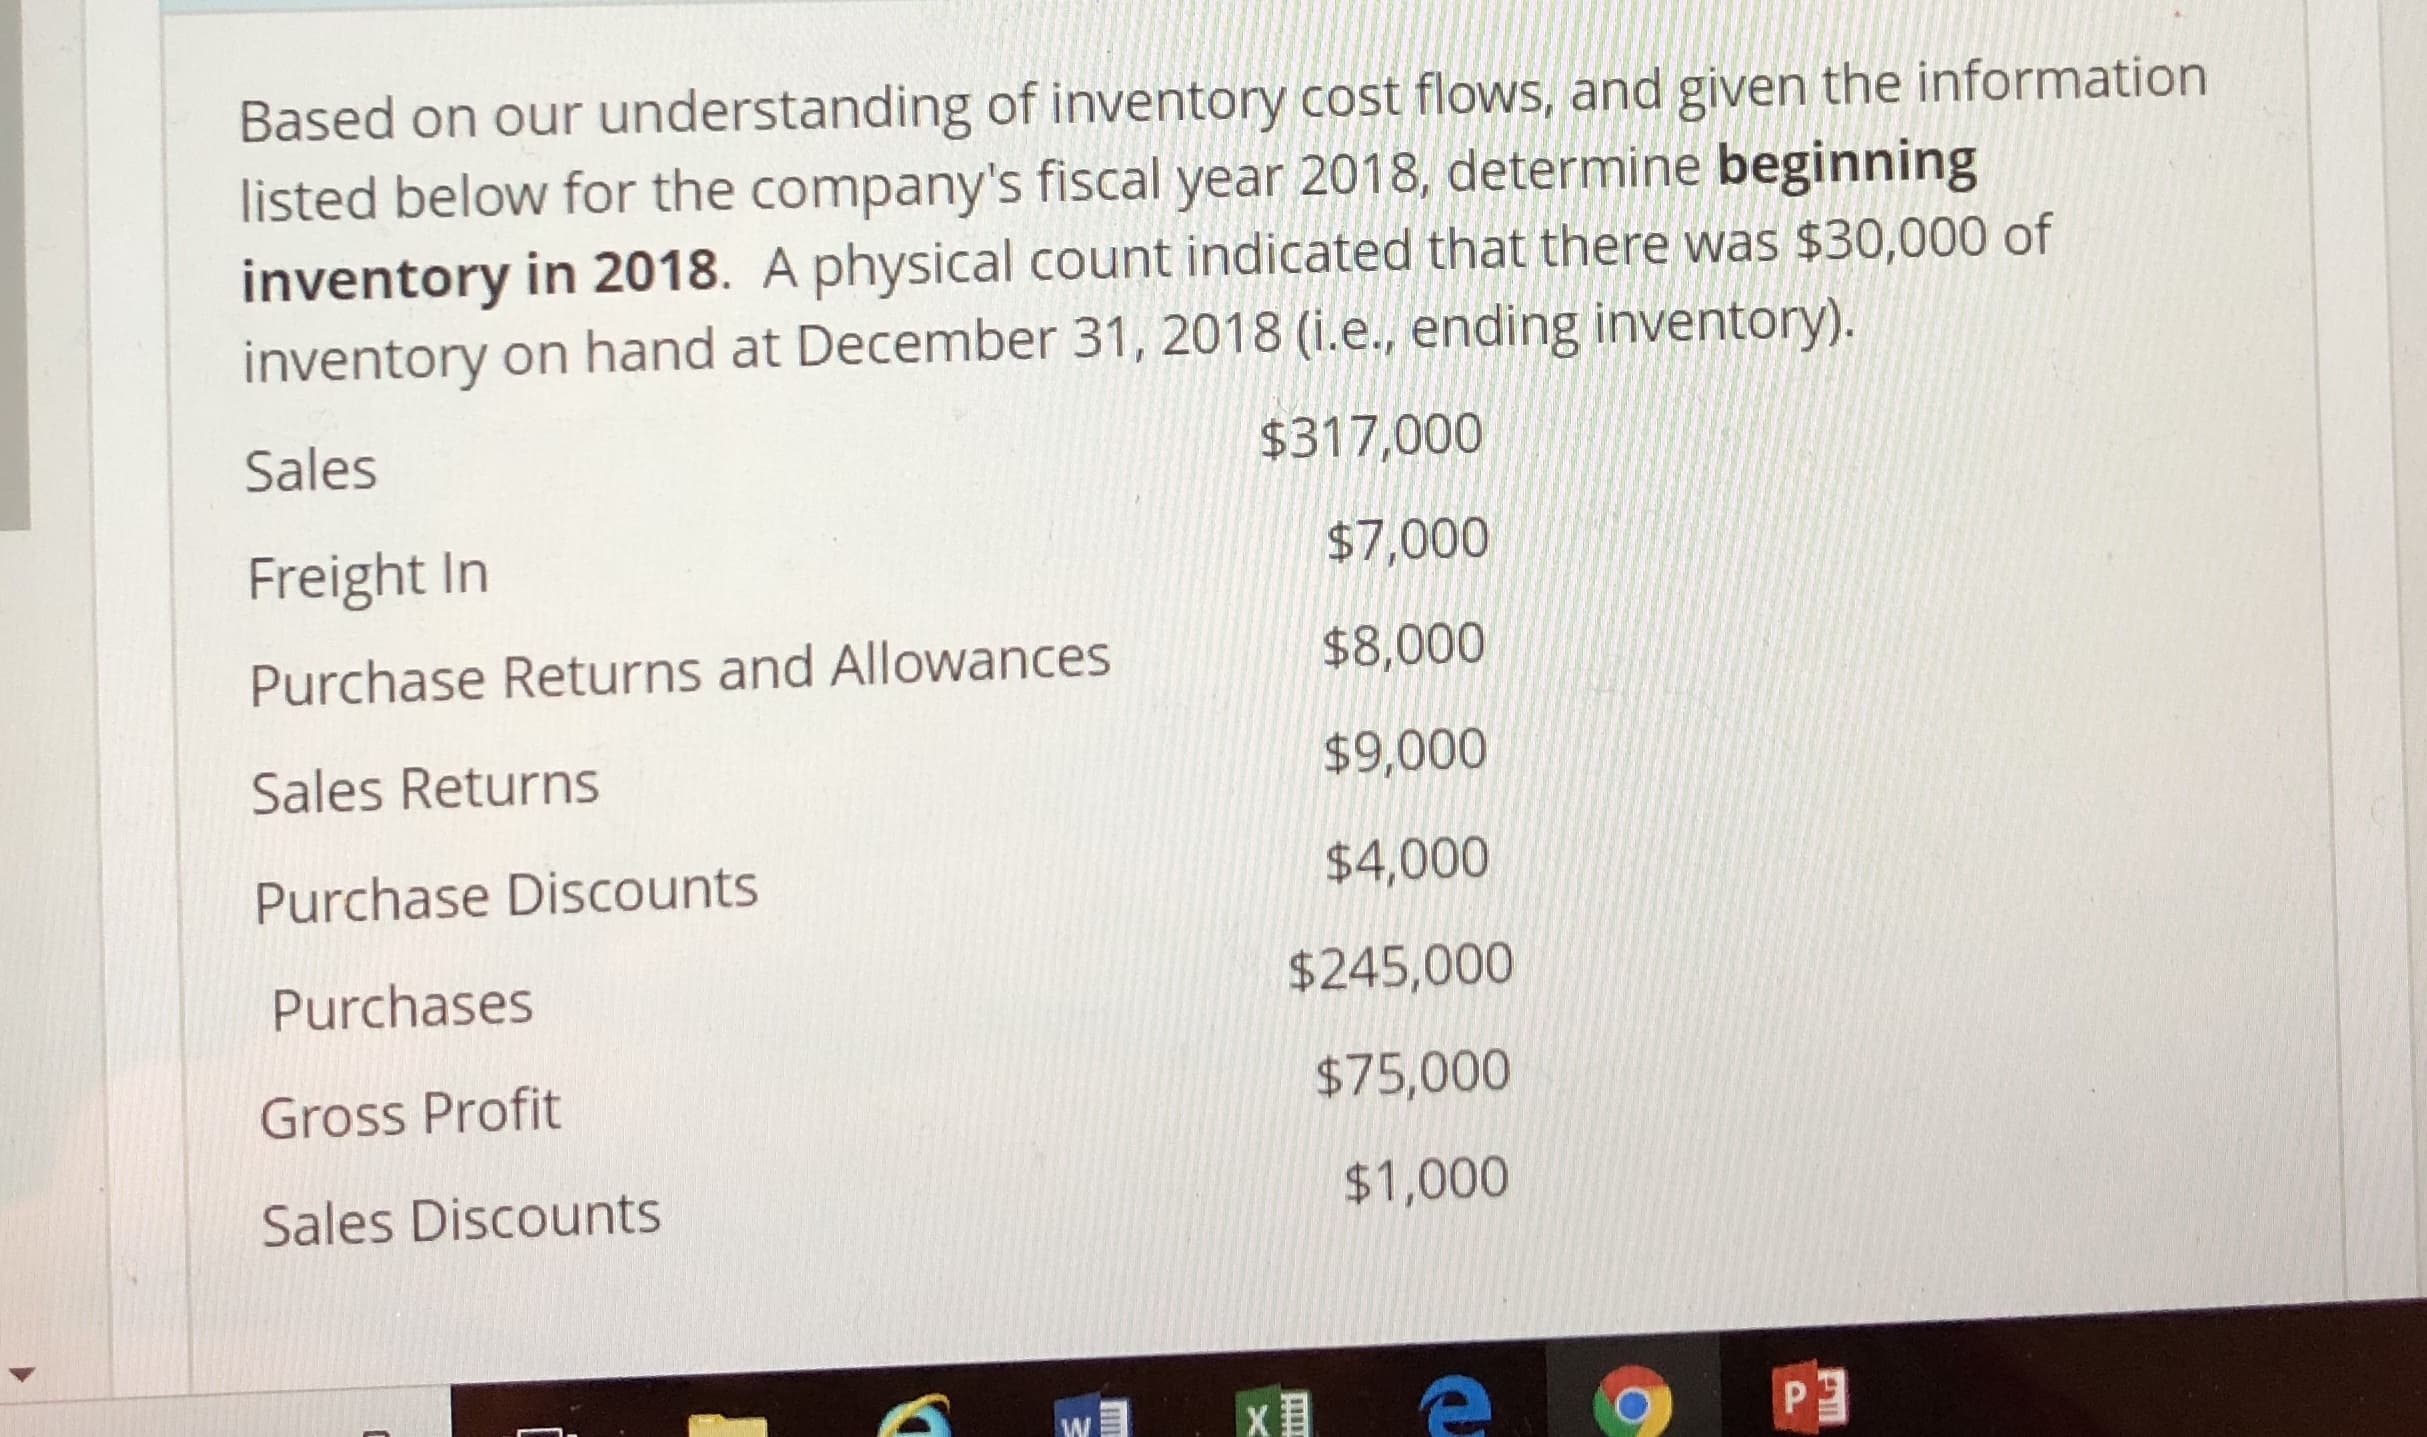 Based on our understanding of inventcory cost fowis,and given the information
listed below for the company's fiscal year 2018 determine beginning
inventory in 2018. A physical count indicated that there was $30,000 of
inventory on hand at December 31, 2018 (i.e.. ending inventory).
Sales
Freight In
Purchase Returns and Allowances
Sales Returns
Purchase Discounts
Purchases
Gross Profit
Sales Discounts
$317,000
$7,000
$8,000
$9,000
$4,000
$245,000
$75,000
$1,000
